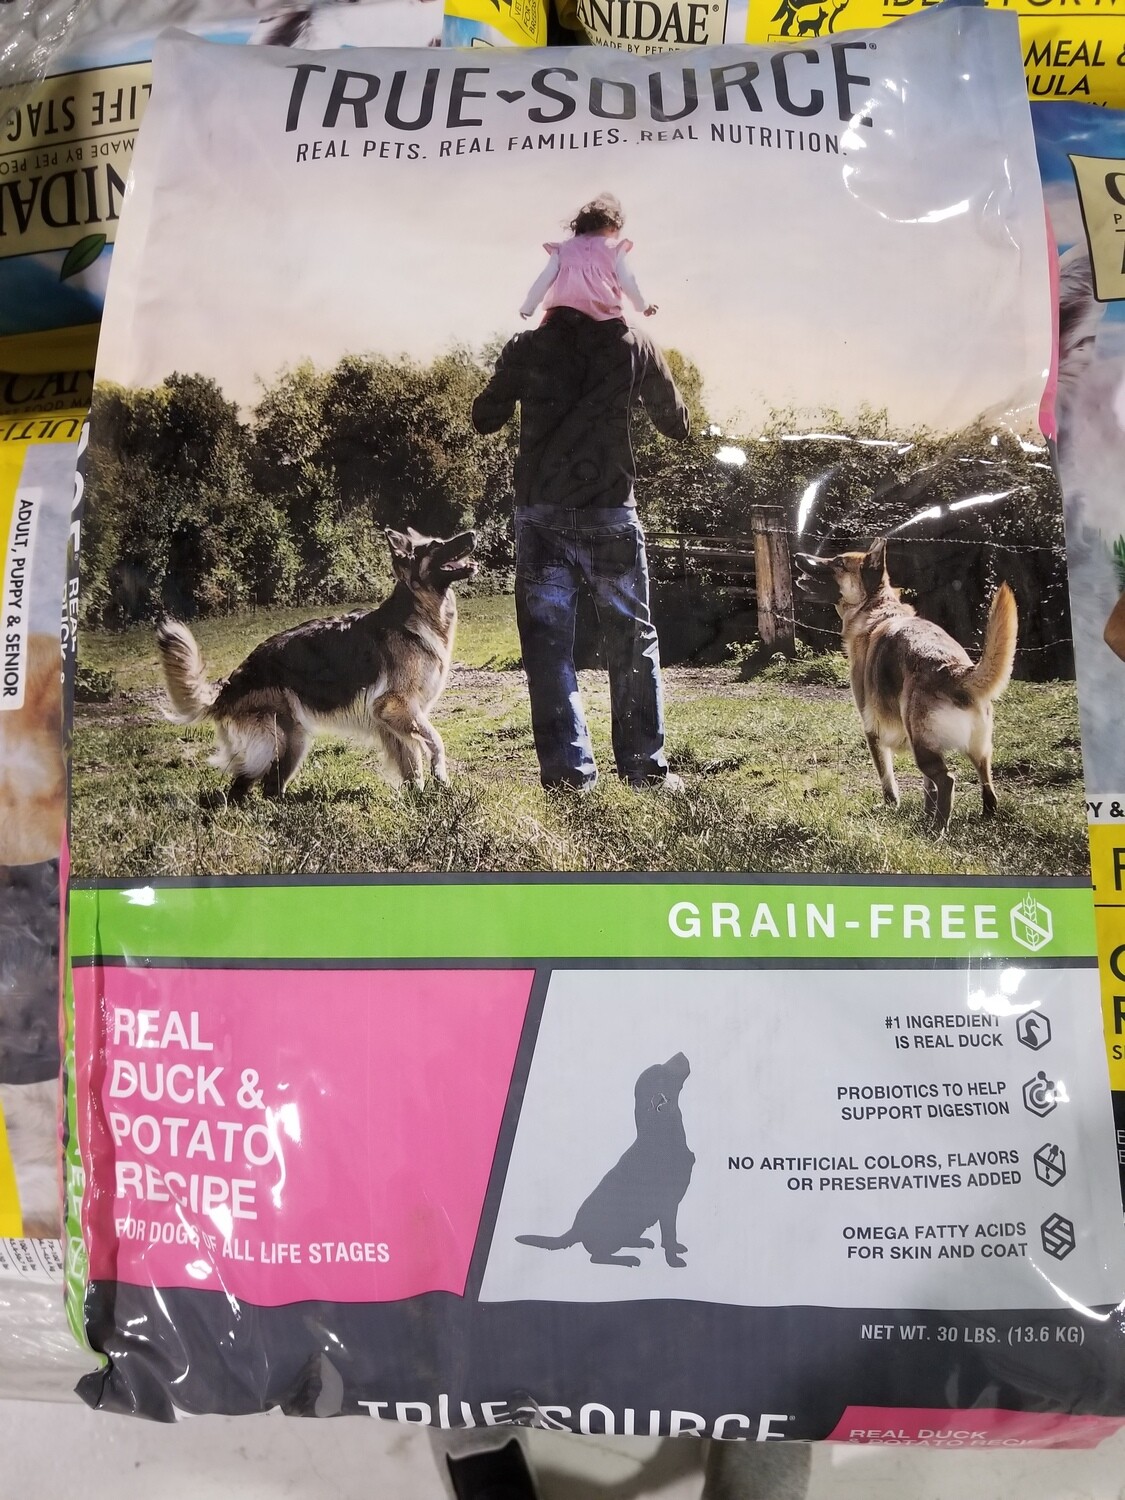 **BULK DEAL** 1800 LBS +/-  True-Source Duck & Sweet Potato Grain-Free Recipe for "All Life Stages" Dogs 60 BAGS 30 LBS EACH (4/22)